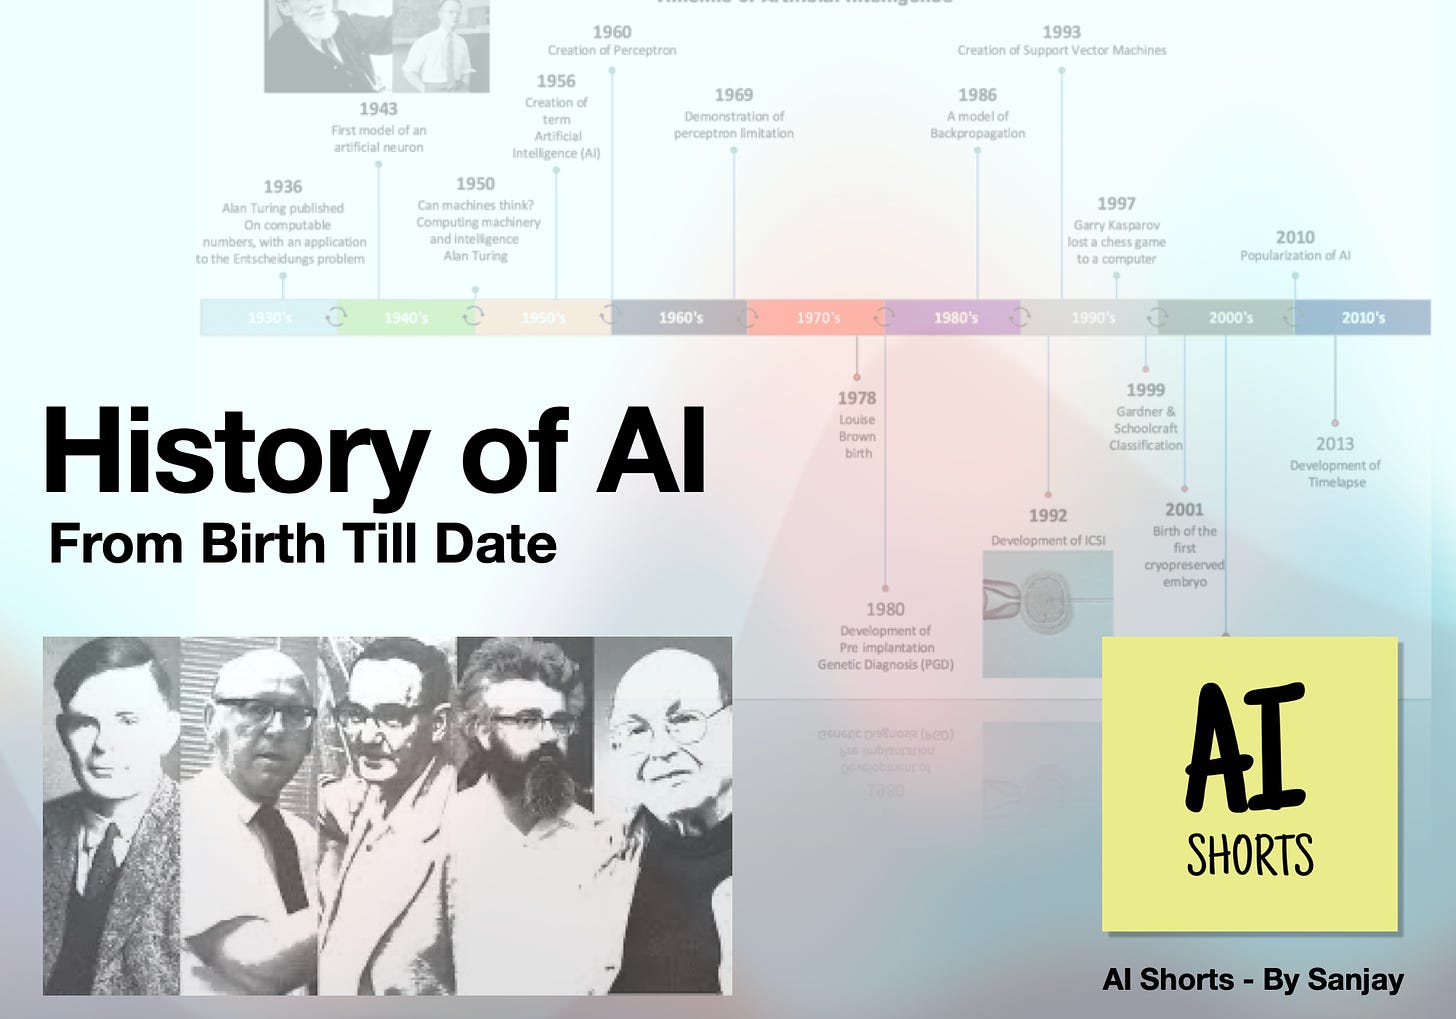 History of AI - From Birth Till Date